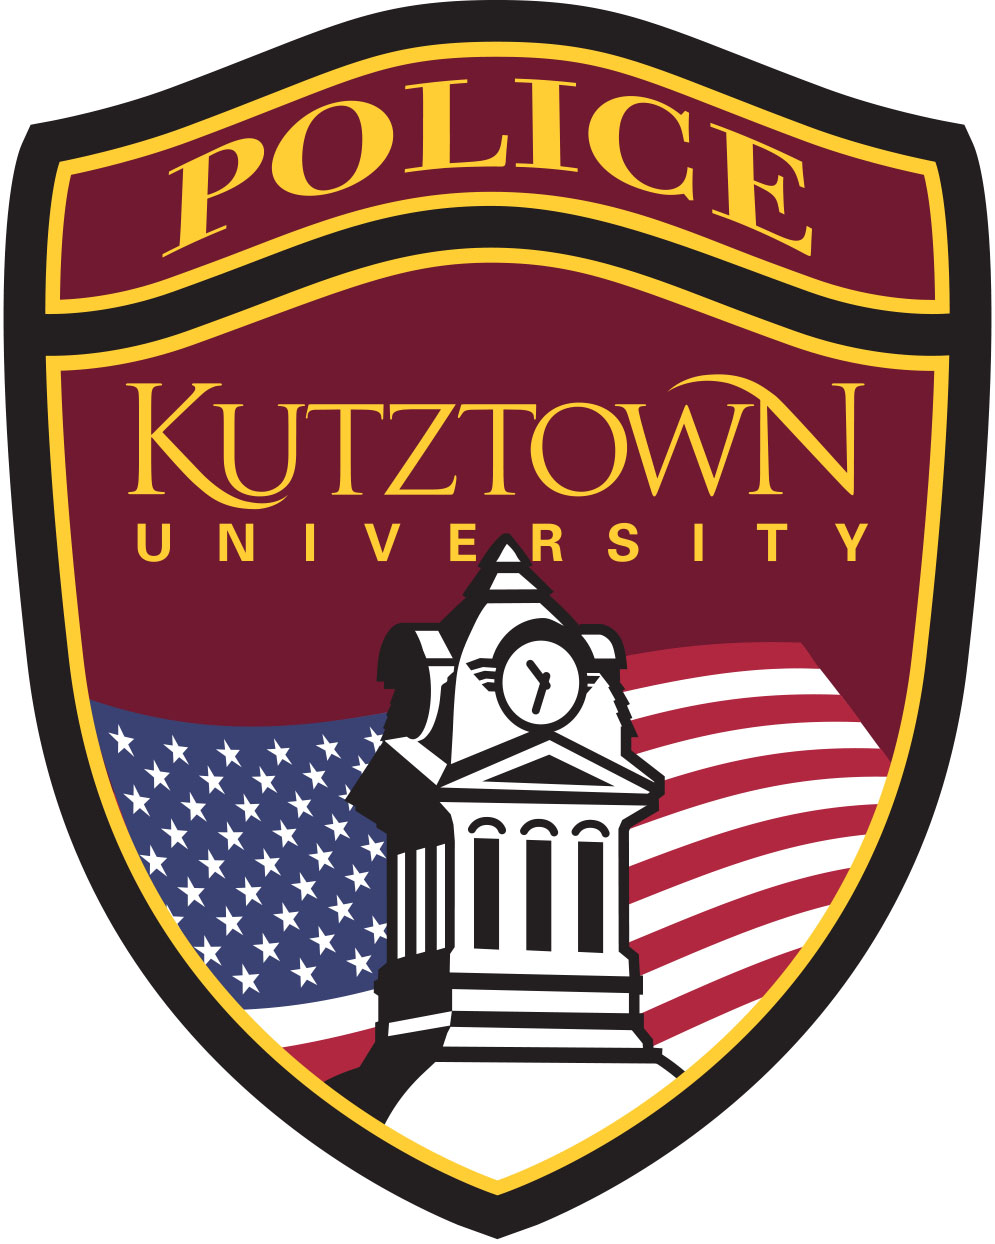 Police Bade reads "Police Kutztown University" with an image of the Old Main Tower over an American Flag.